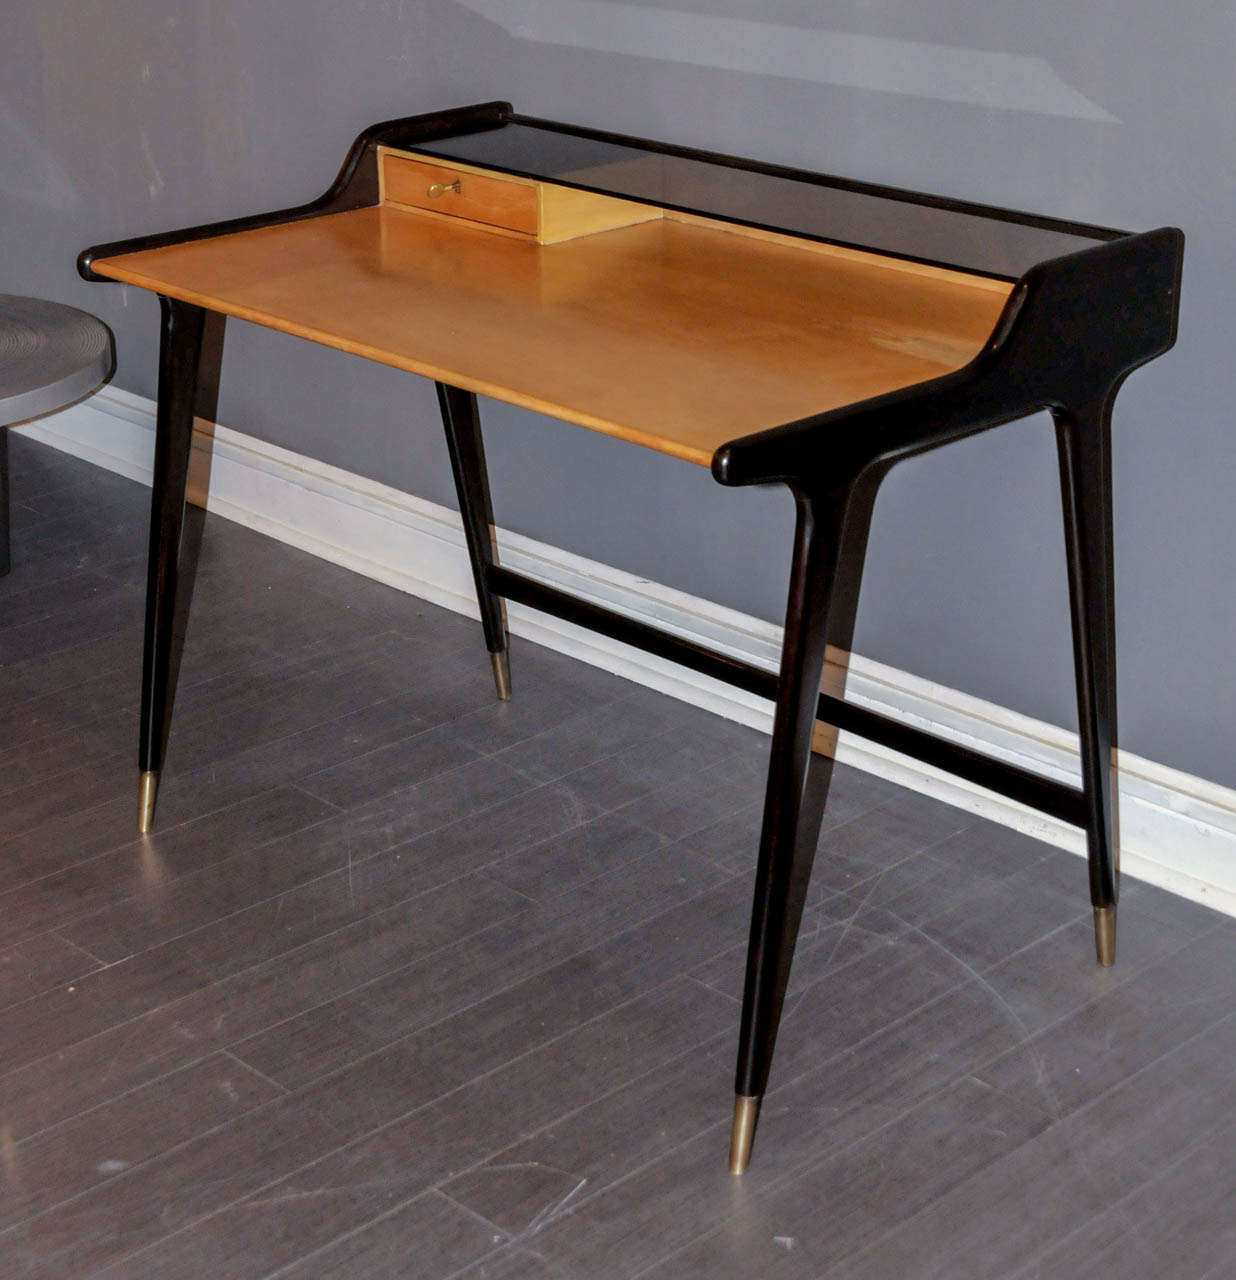 1970's desk by Ico Parisi. Light and ebonized wood. Bronze feet. Smoked glass top. One drawer. Good condition. Normal wear consistent with age and use.